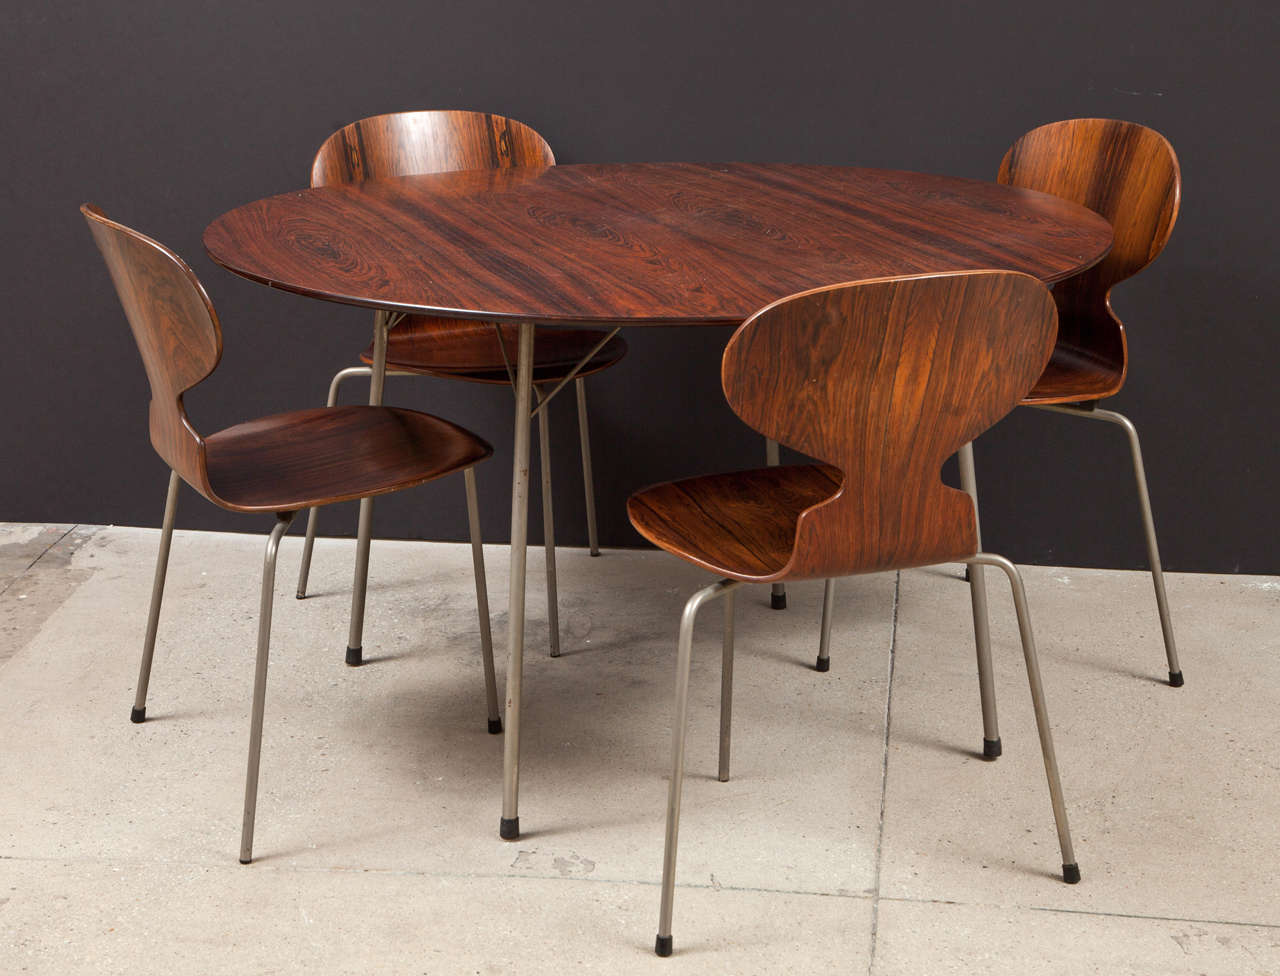 A matching set of four dining chairs and a round table in Rosewood with steel lets.  Designed by Arne Jacobsen for Fritz Hansen.  Signed.  Denmark, circa 1960.

Features the Model 3600 dining table and Model 3101 chair.